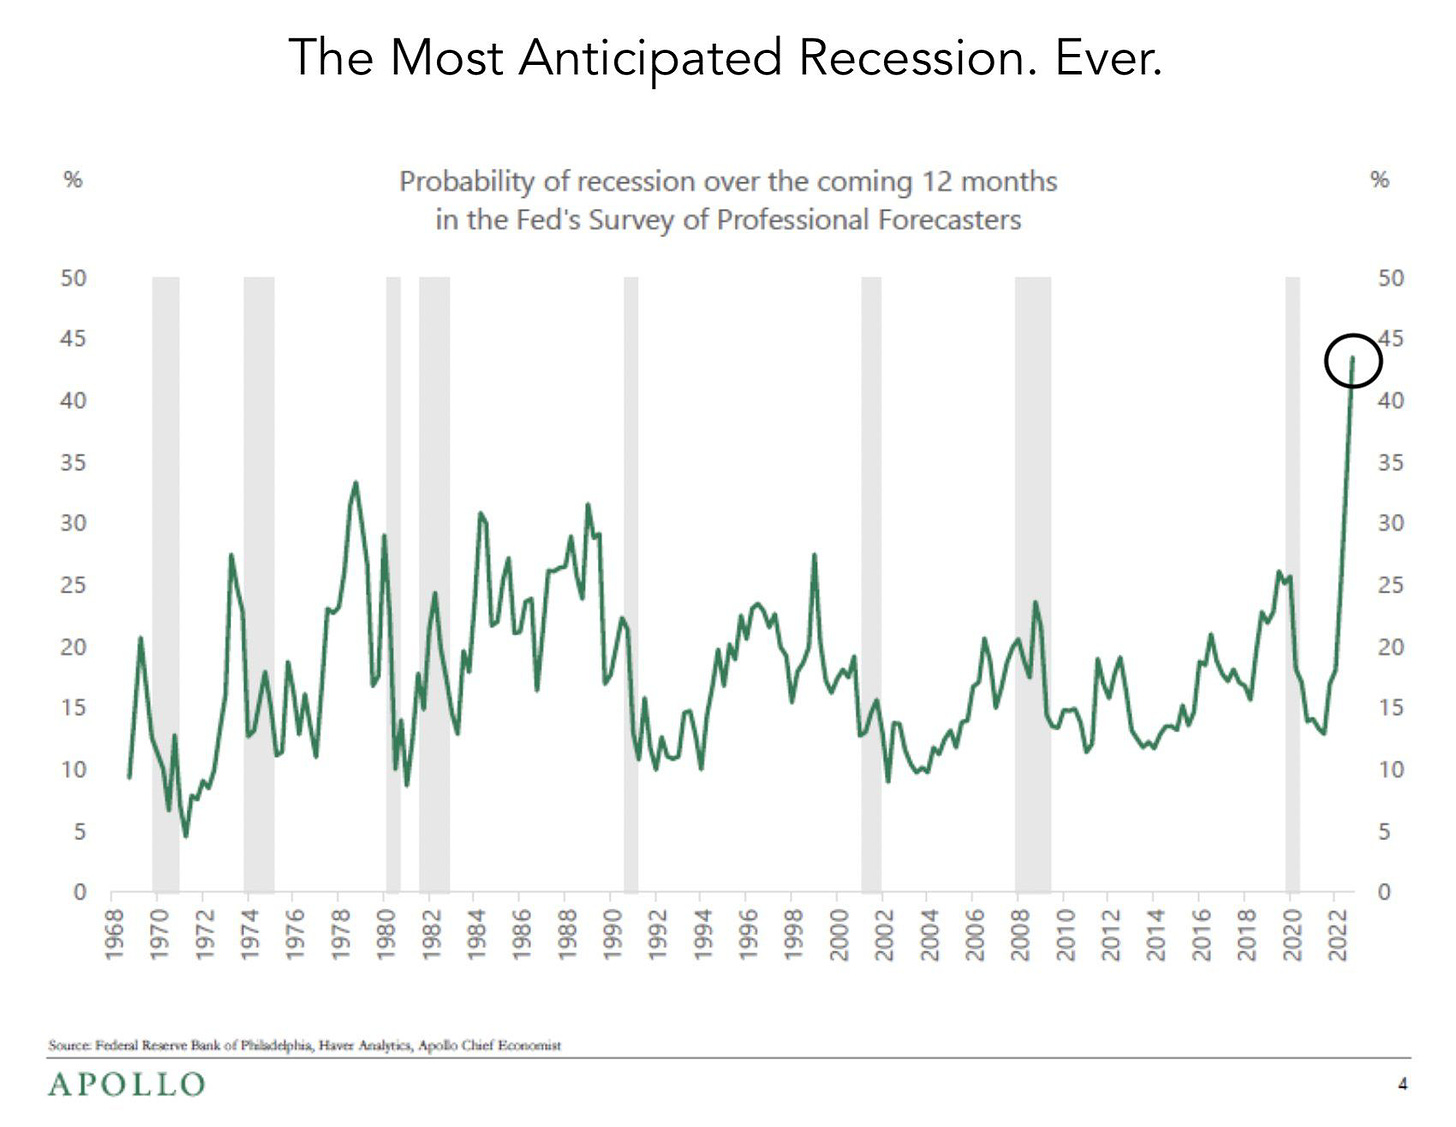 50 
45 
40 
35 
30 
25 
20 
15 
10 
5 
a) 
APOLLO 
The Most Anticipated Recession. Ever. 
Probability of recession over the coming 12 months 
in the Fed's Survey of Professional Forecasters 
co 
8 
8 
O 
O 
O 
O 
o 
O 
50 
45 
35 
30 
25 
20 
15 
10 
5 
o 